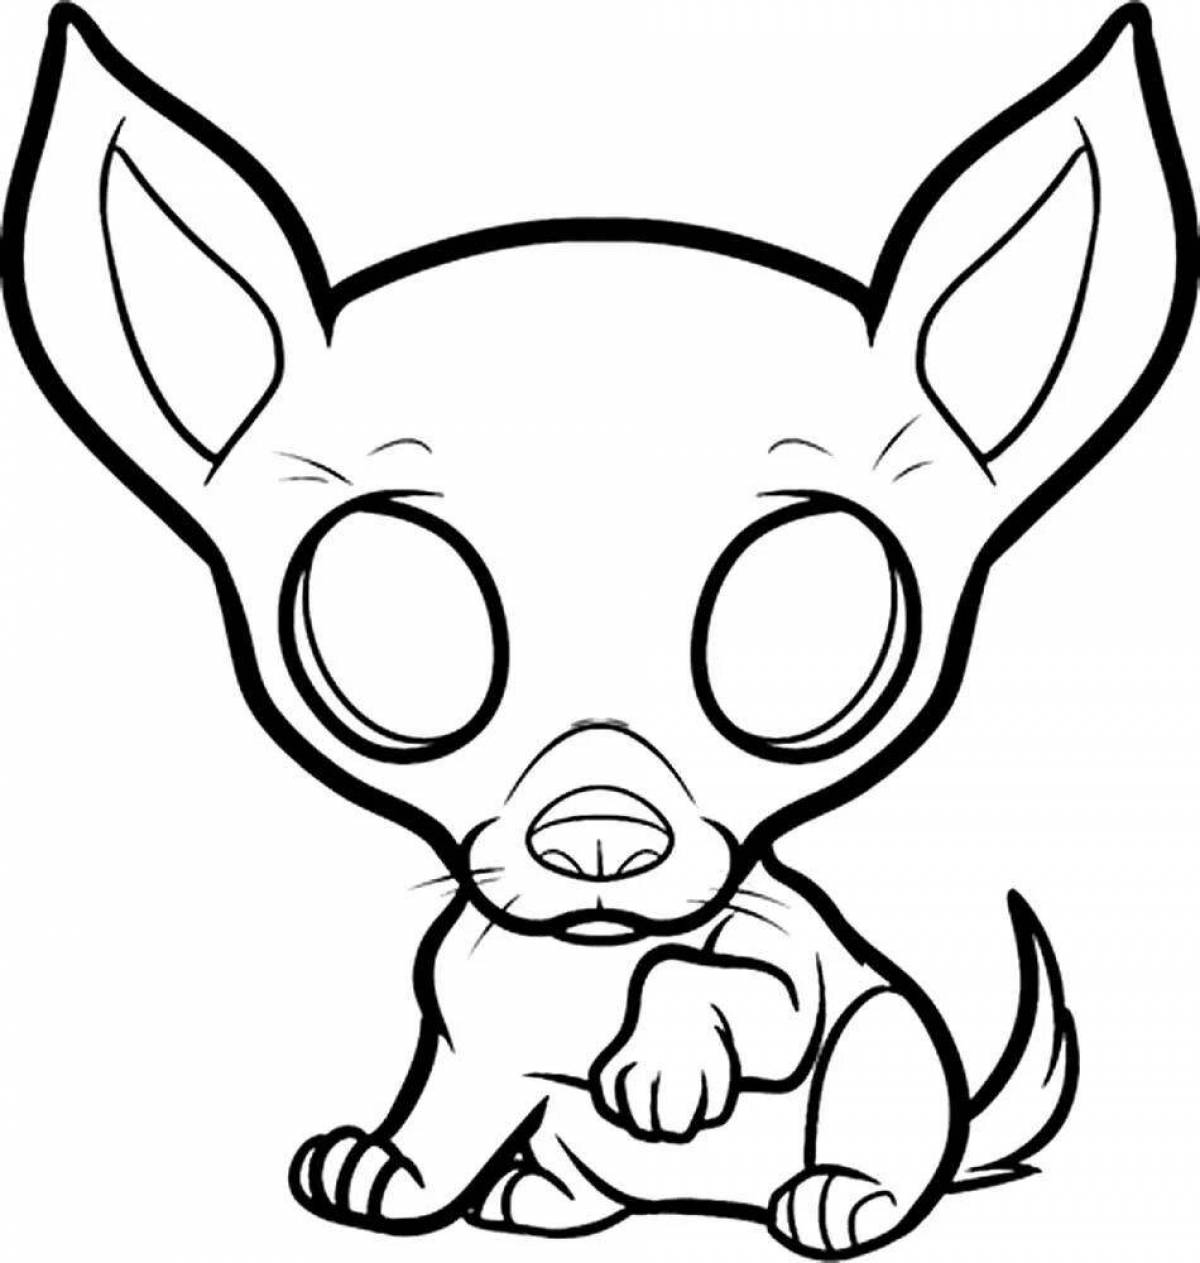 A wonderful chihuahua coloring book for kids